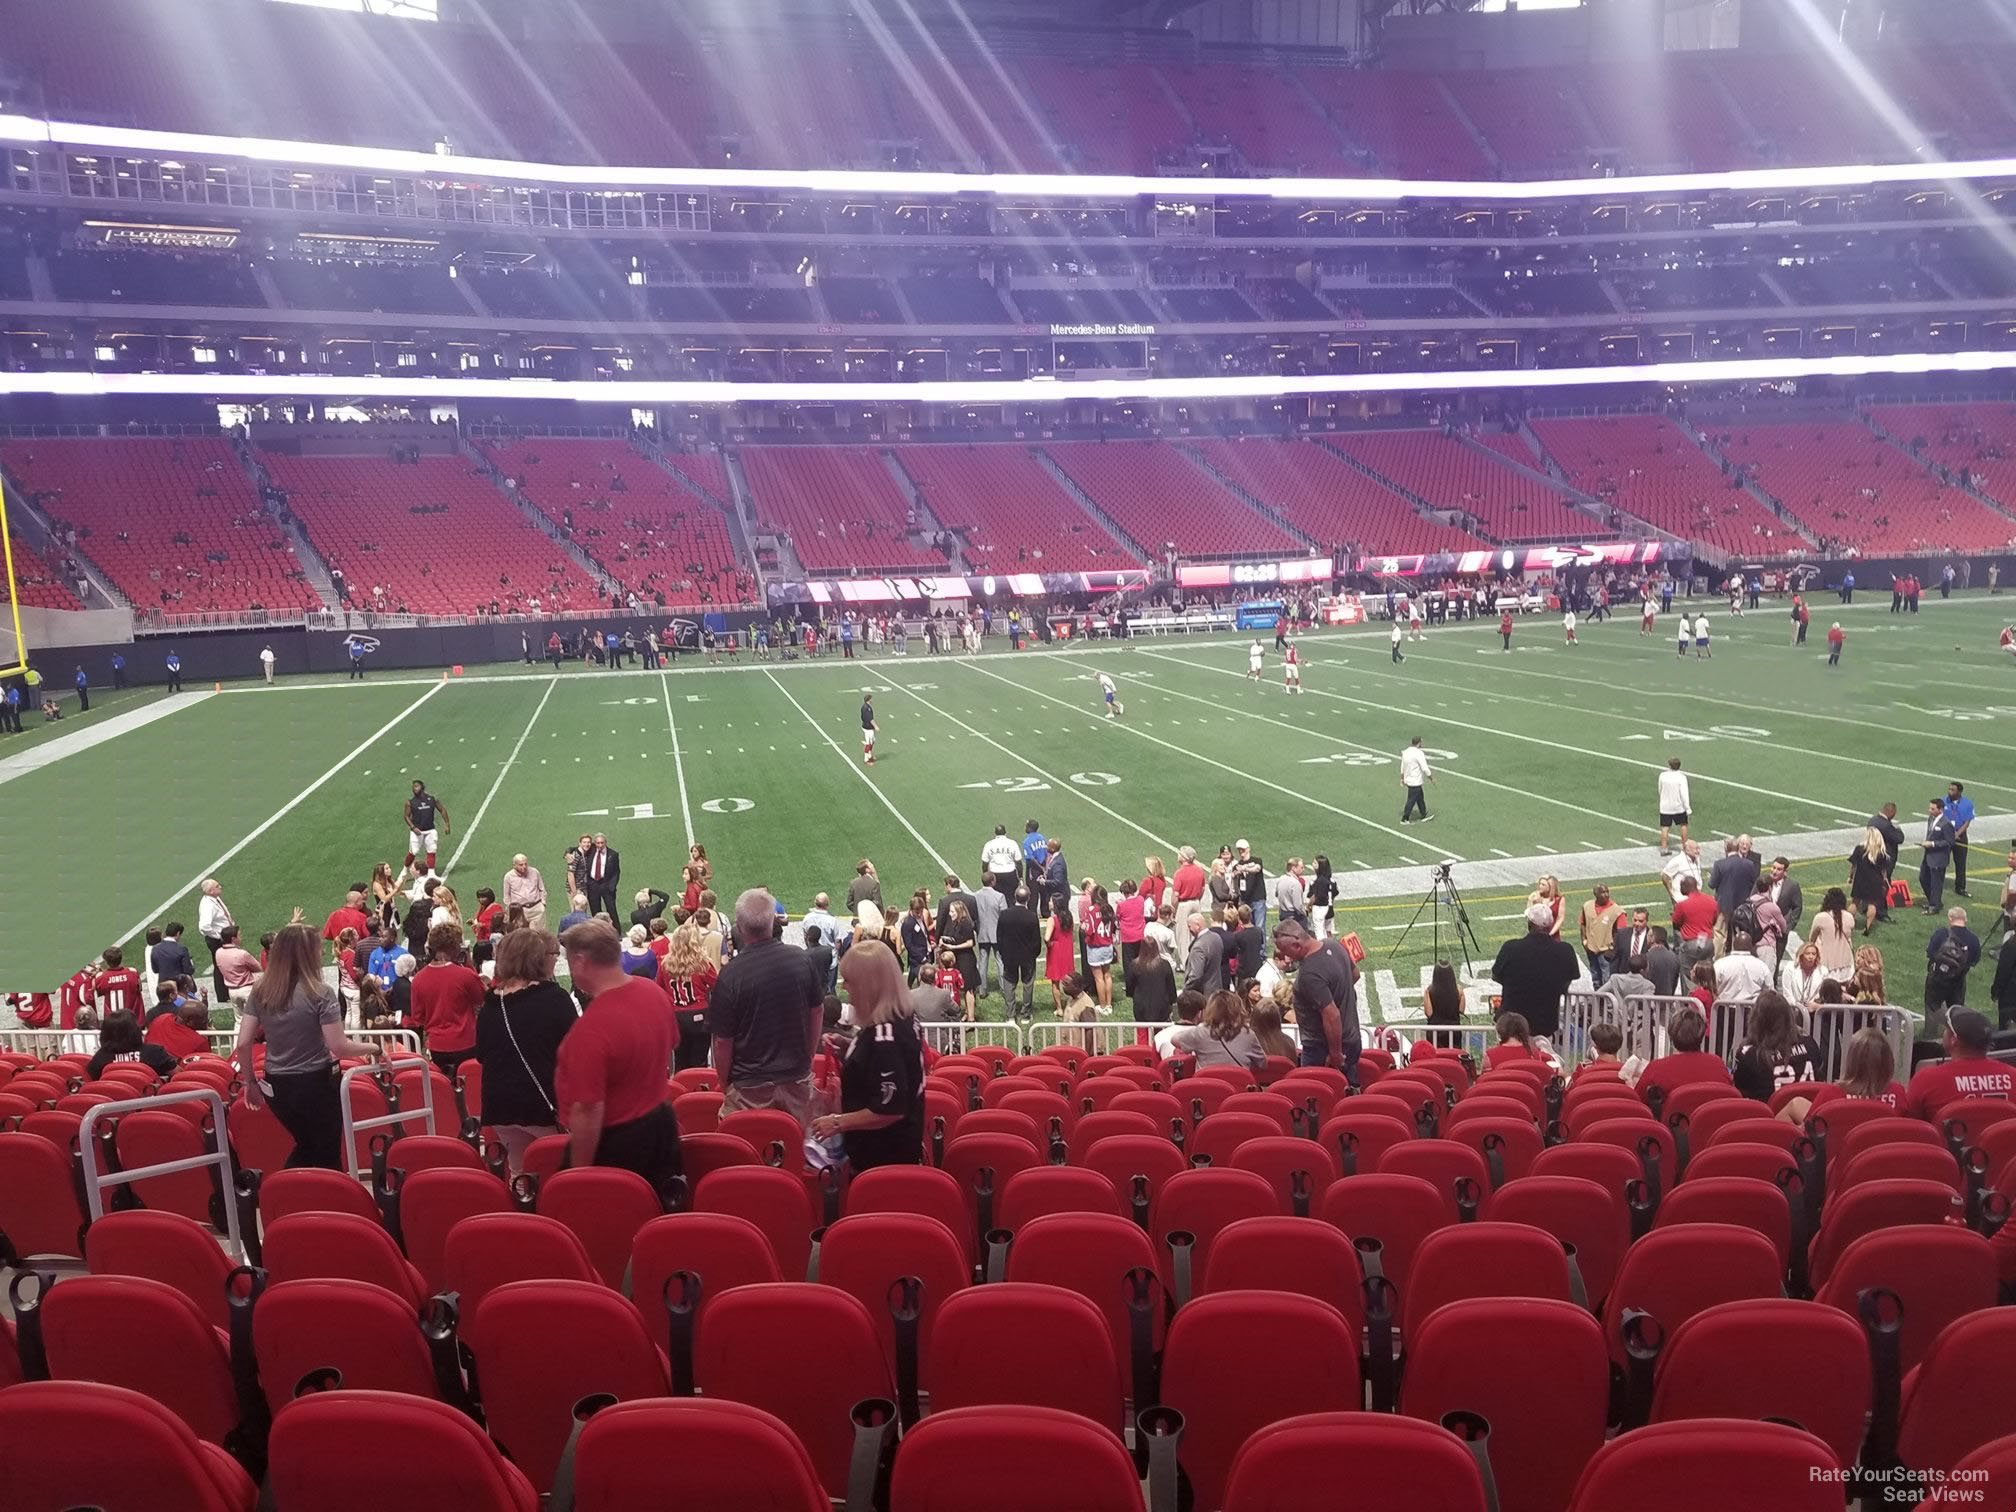 section 113, row 15 seat view  for football - mercedes-benz stadium